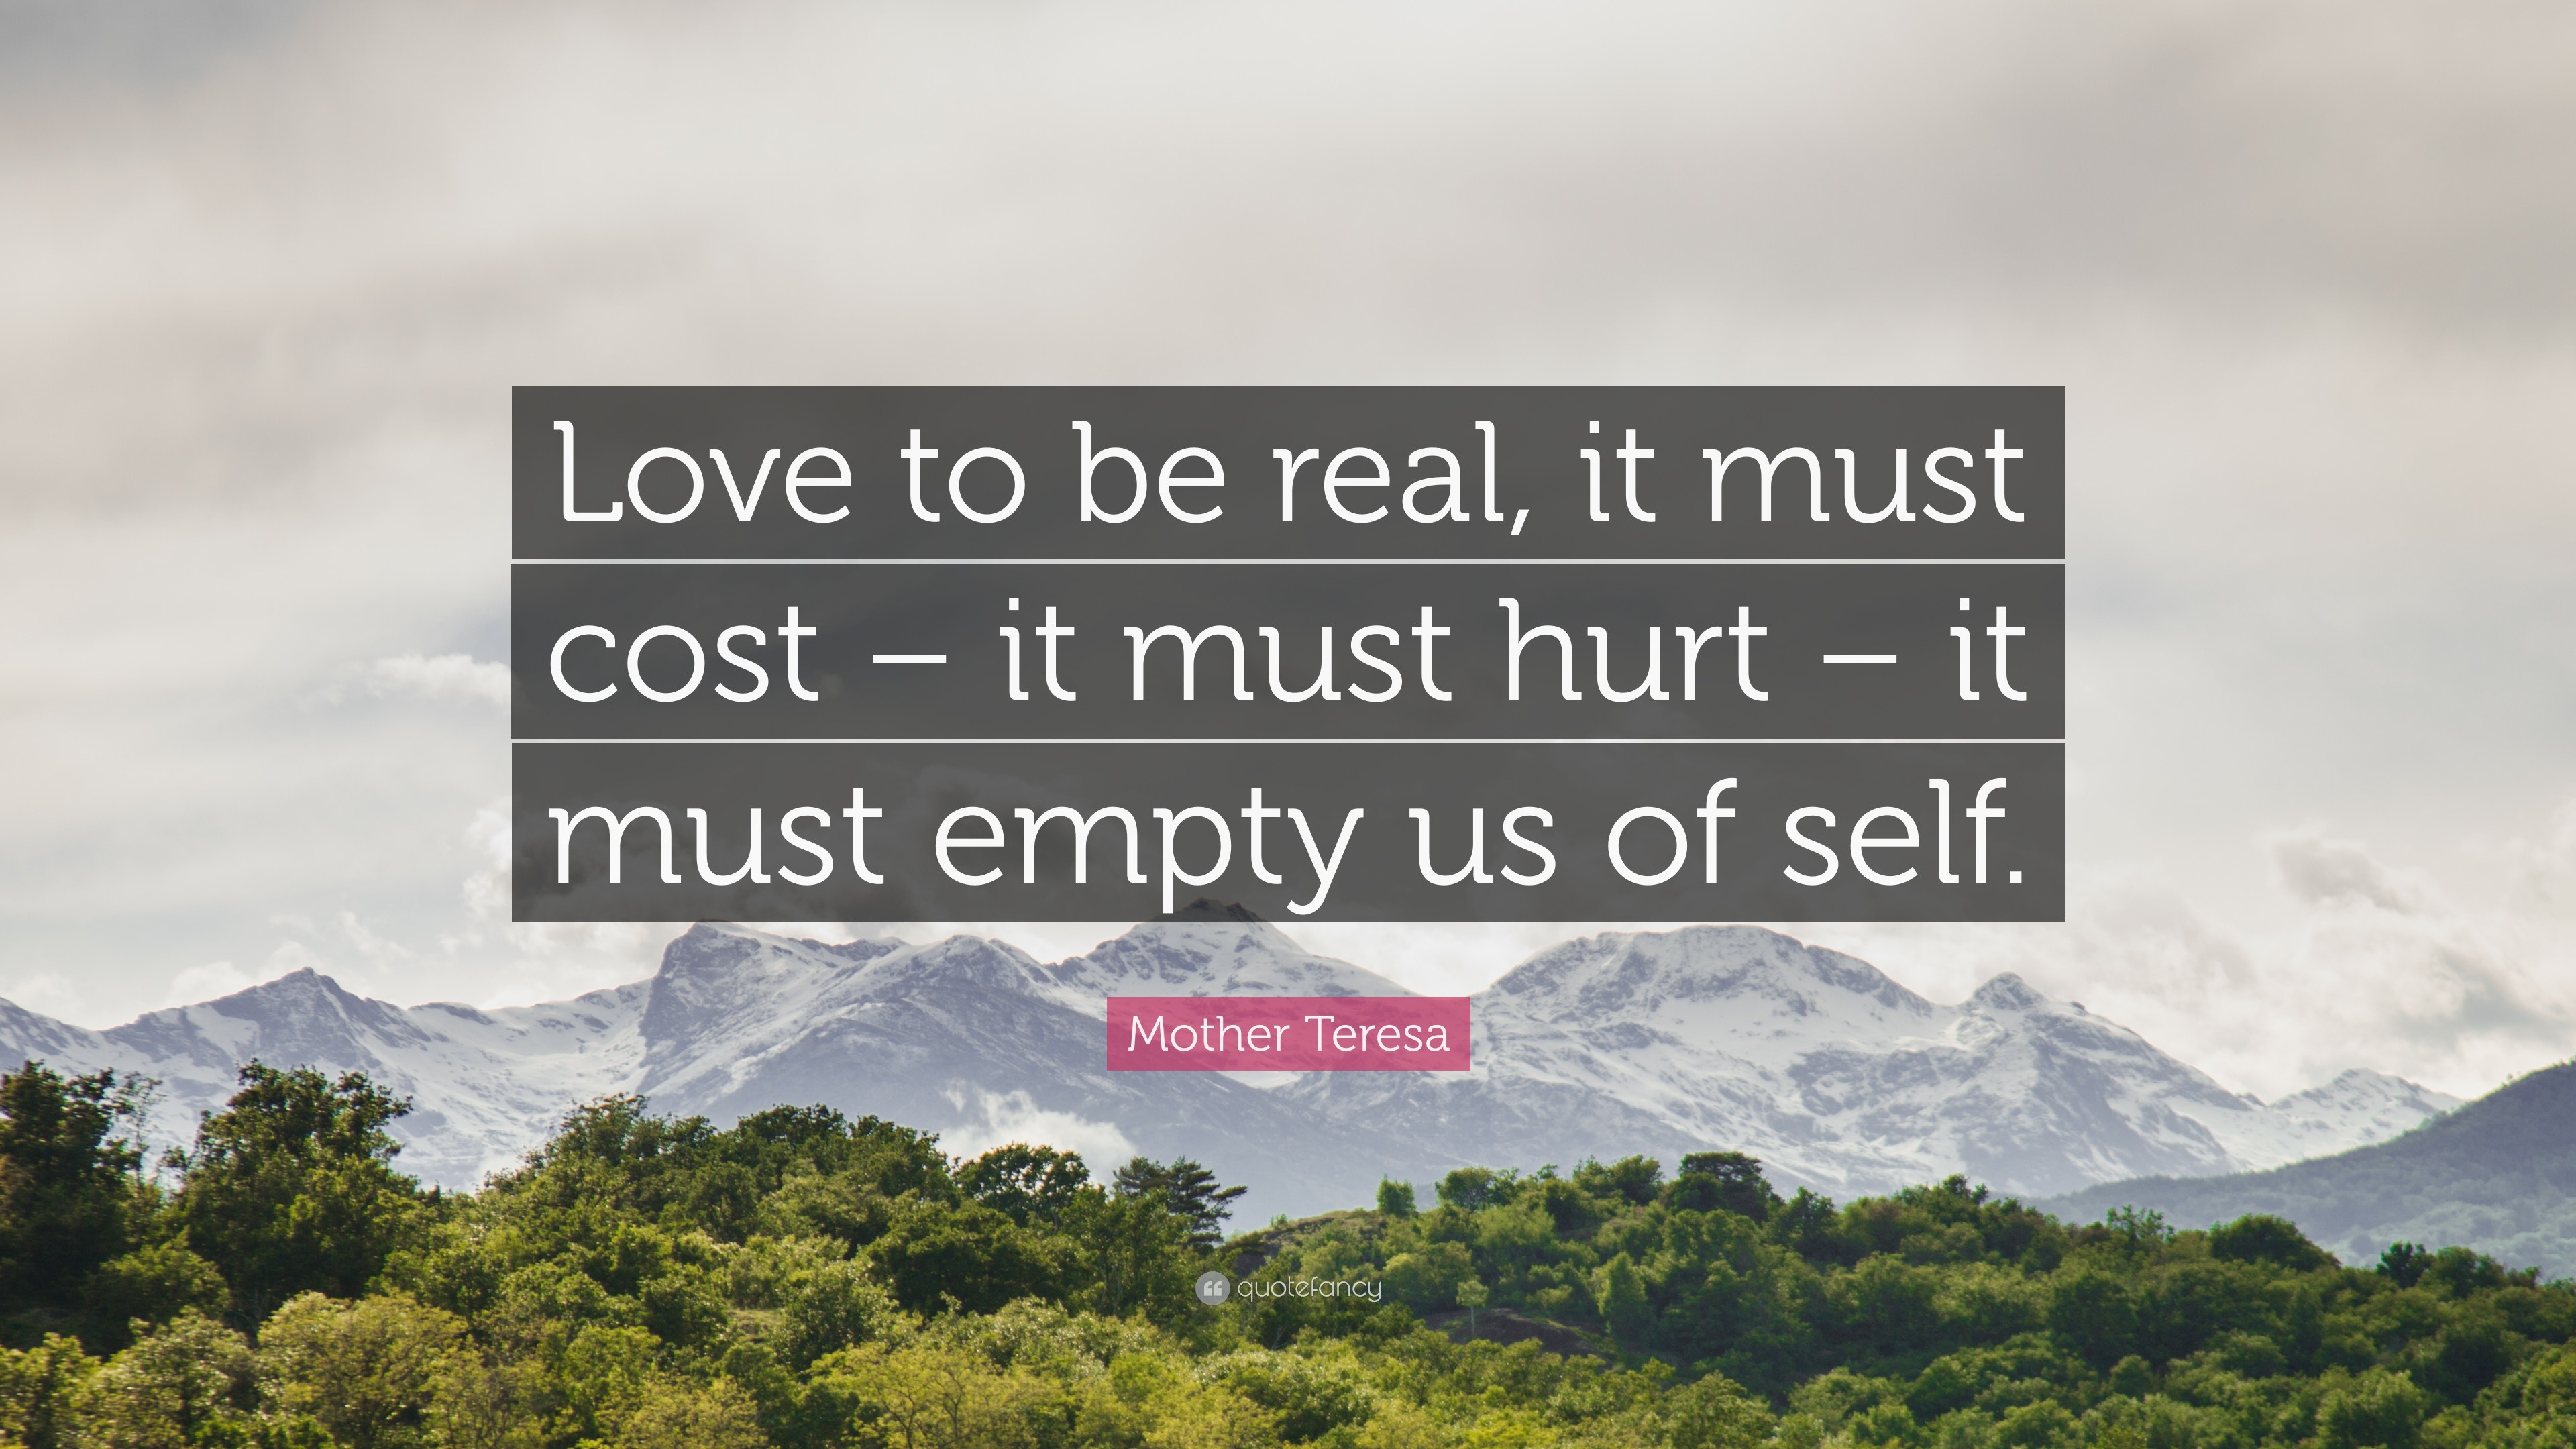 Mother Teresa Quote “Love to be real it must cost – it must